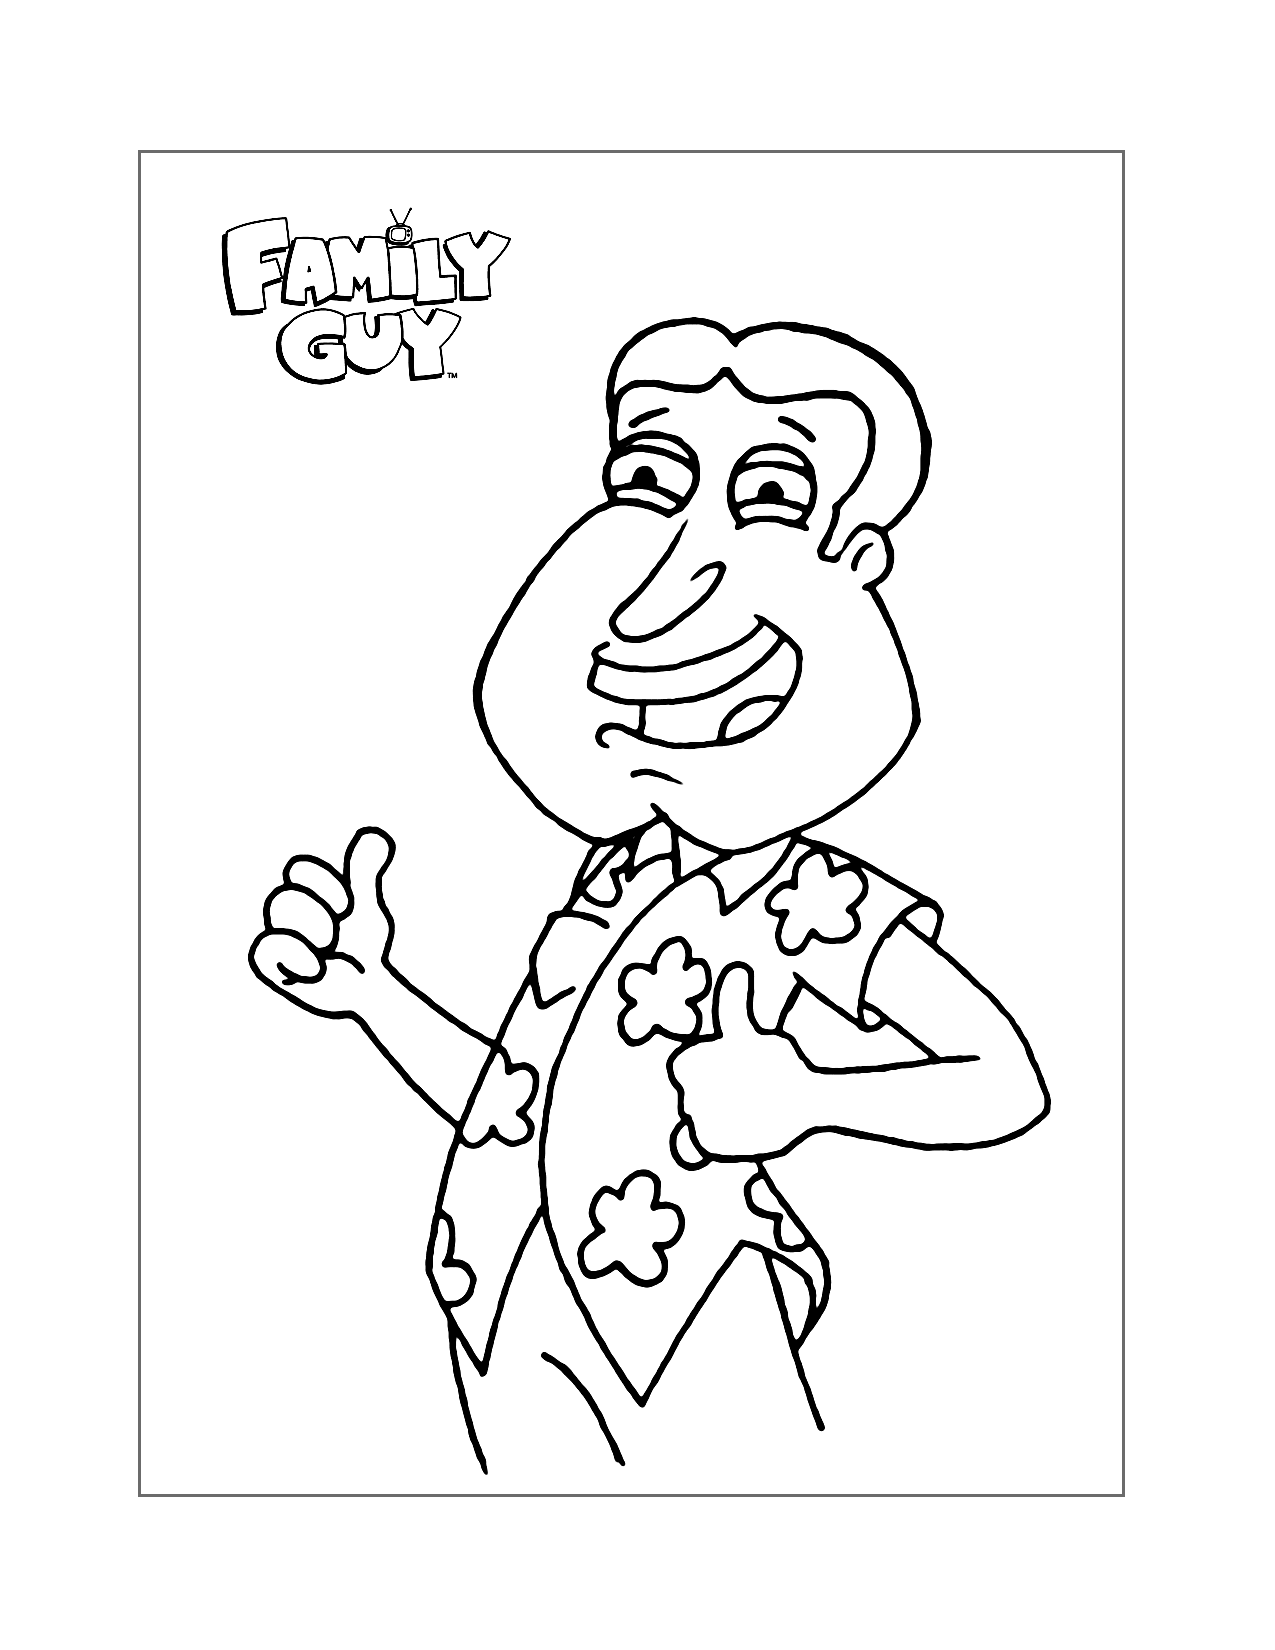 Glenn Quagmire Family Guy Coloring Pages